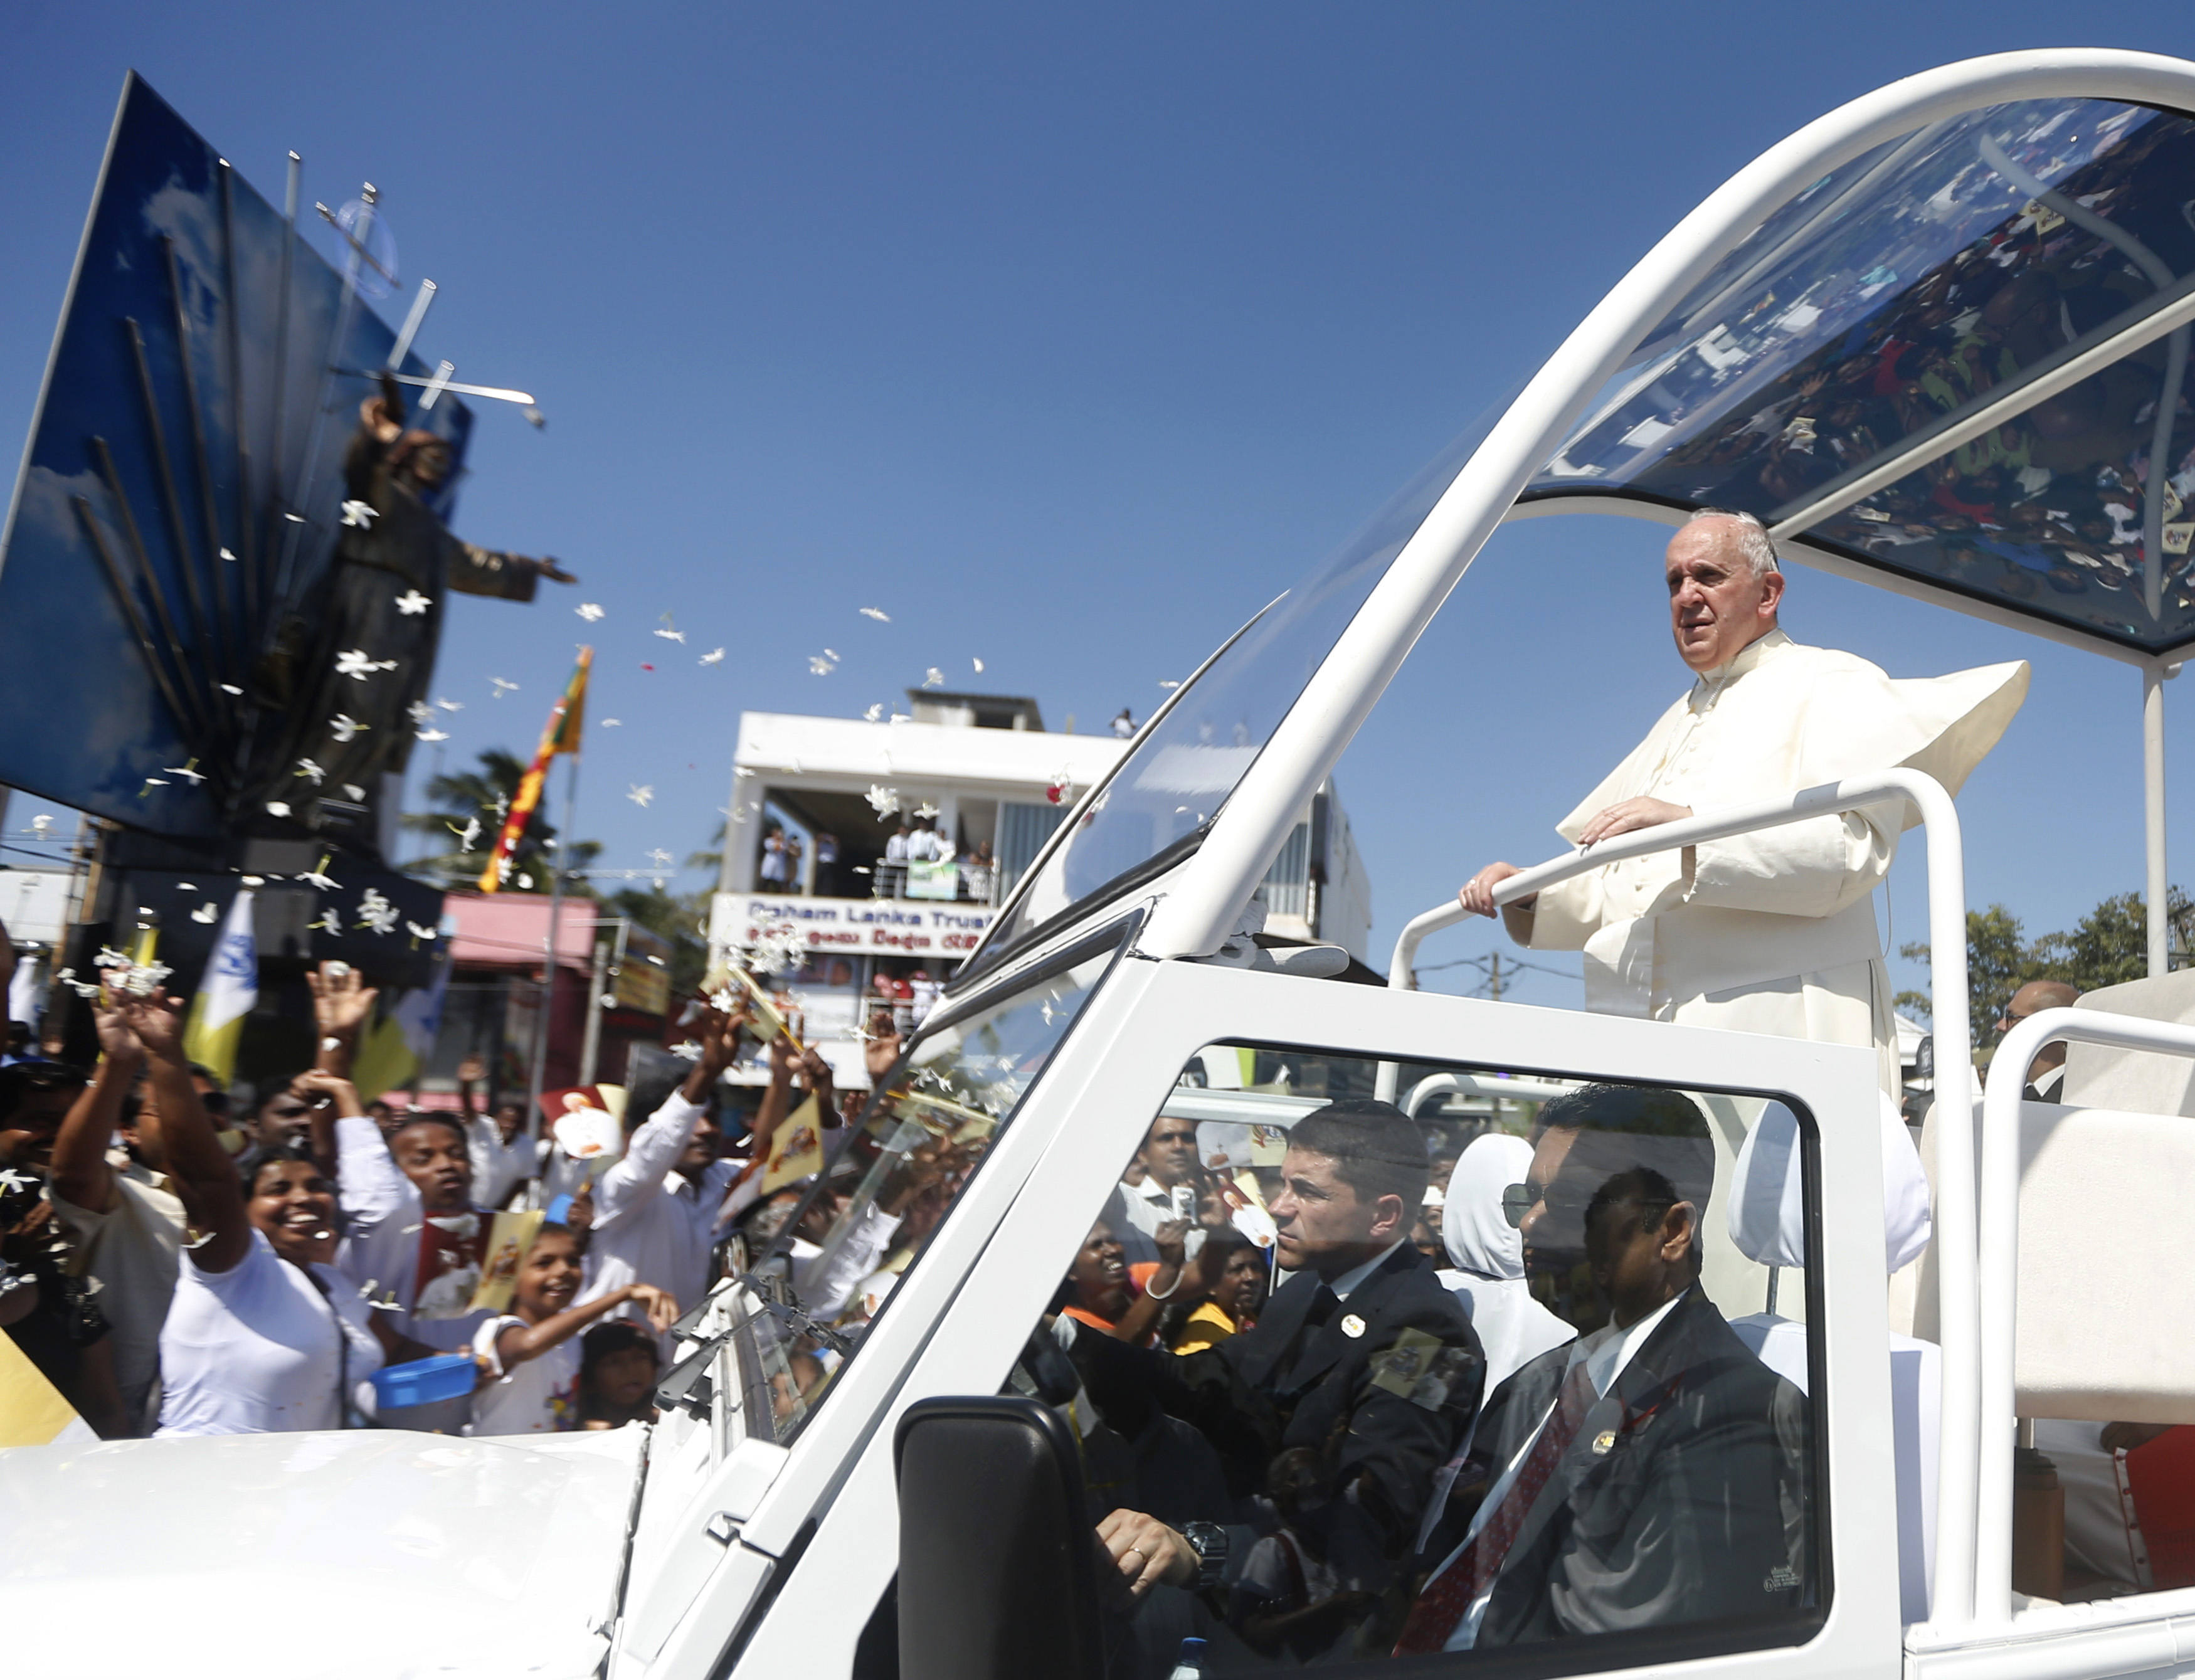 Pope Francis stands on his vehicle as devotees gather on the road to see him after he arrived at the Colombo airport Jan. 13, 2015 (Dinuka Liyanawatte—Reuters)